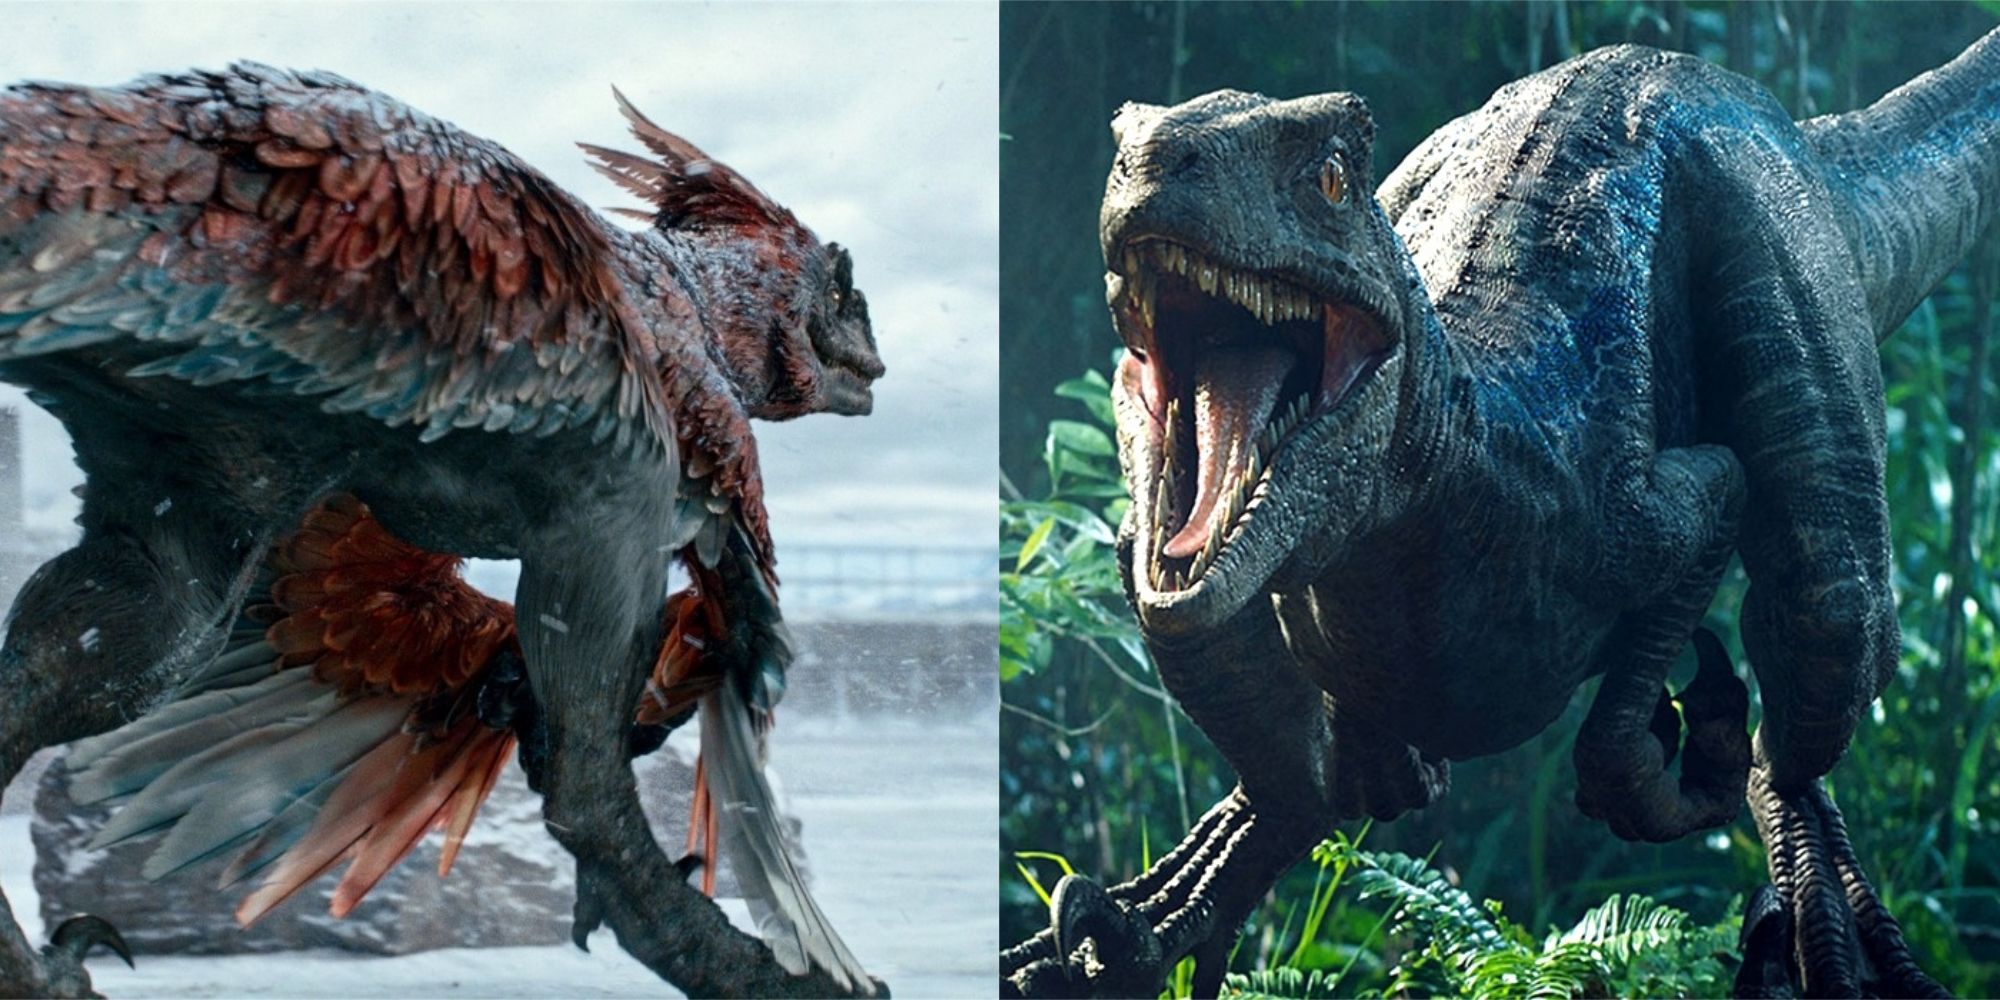 Jurassic World: Scientists criticise 'dumb monster movie' for lack of  feathers on dinosaurs, The Independent